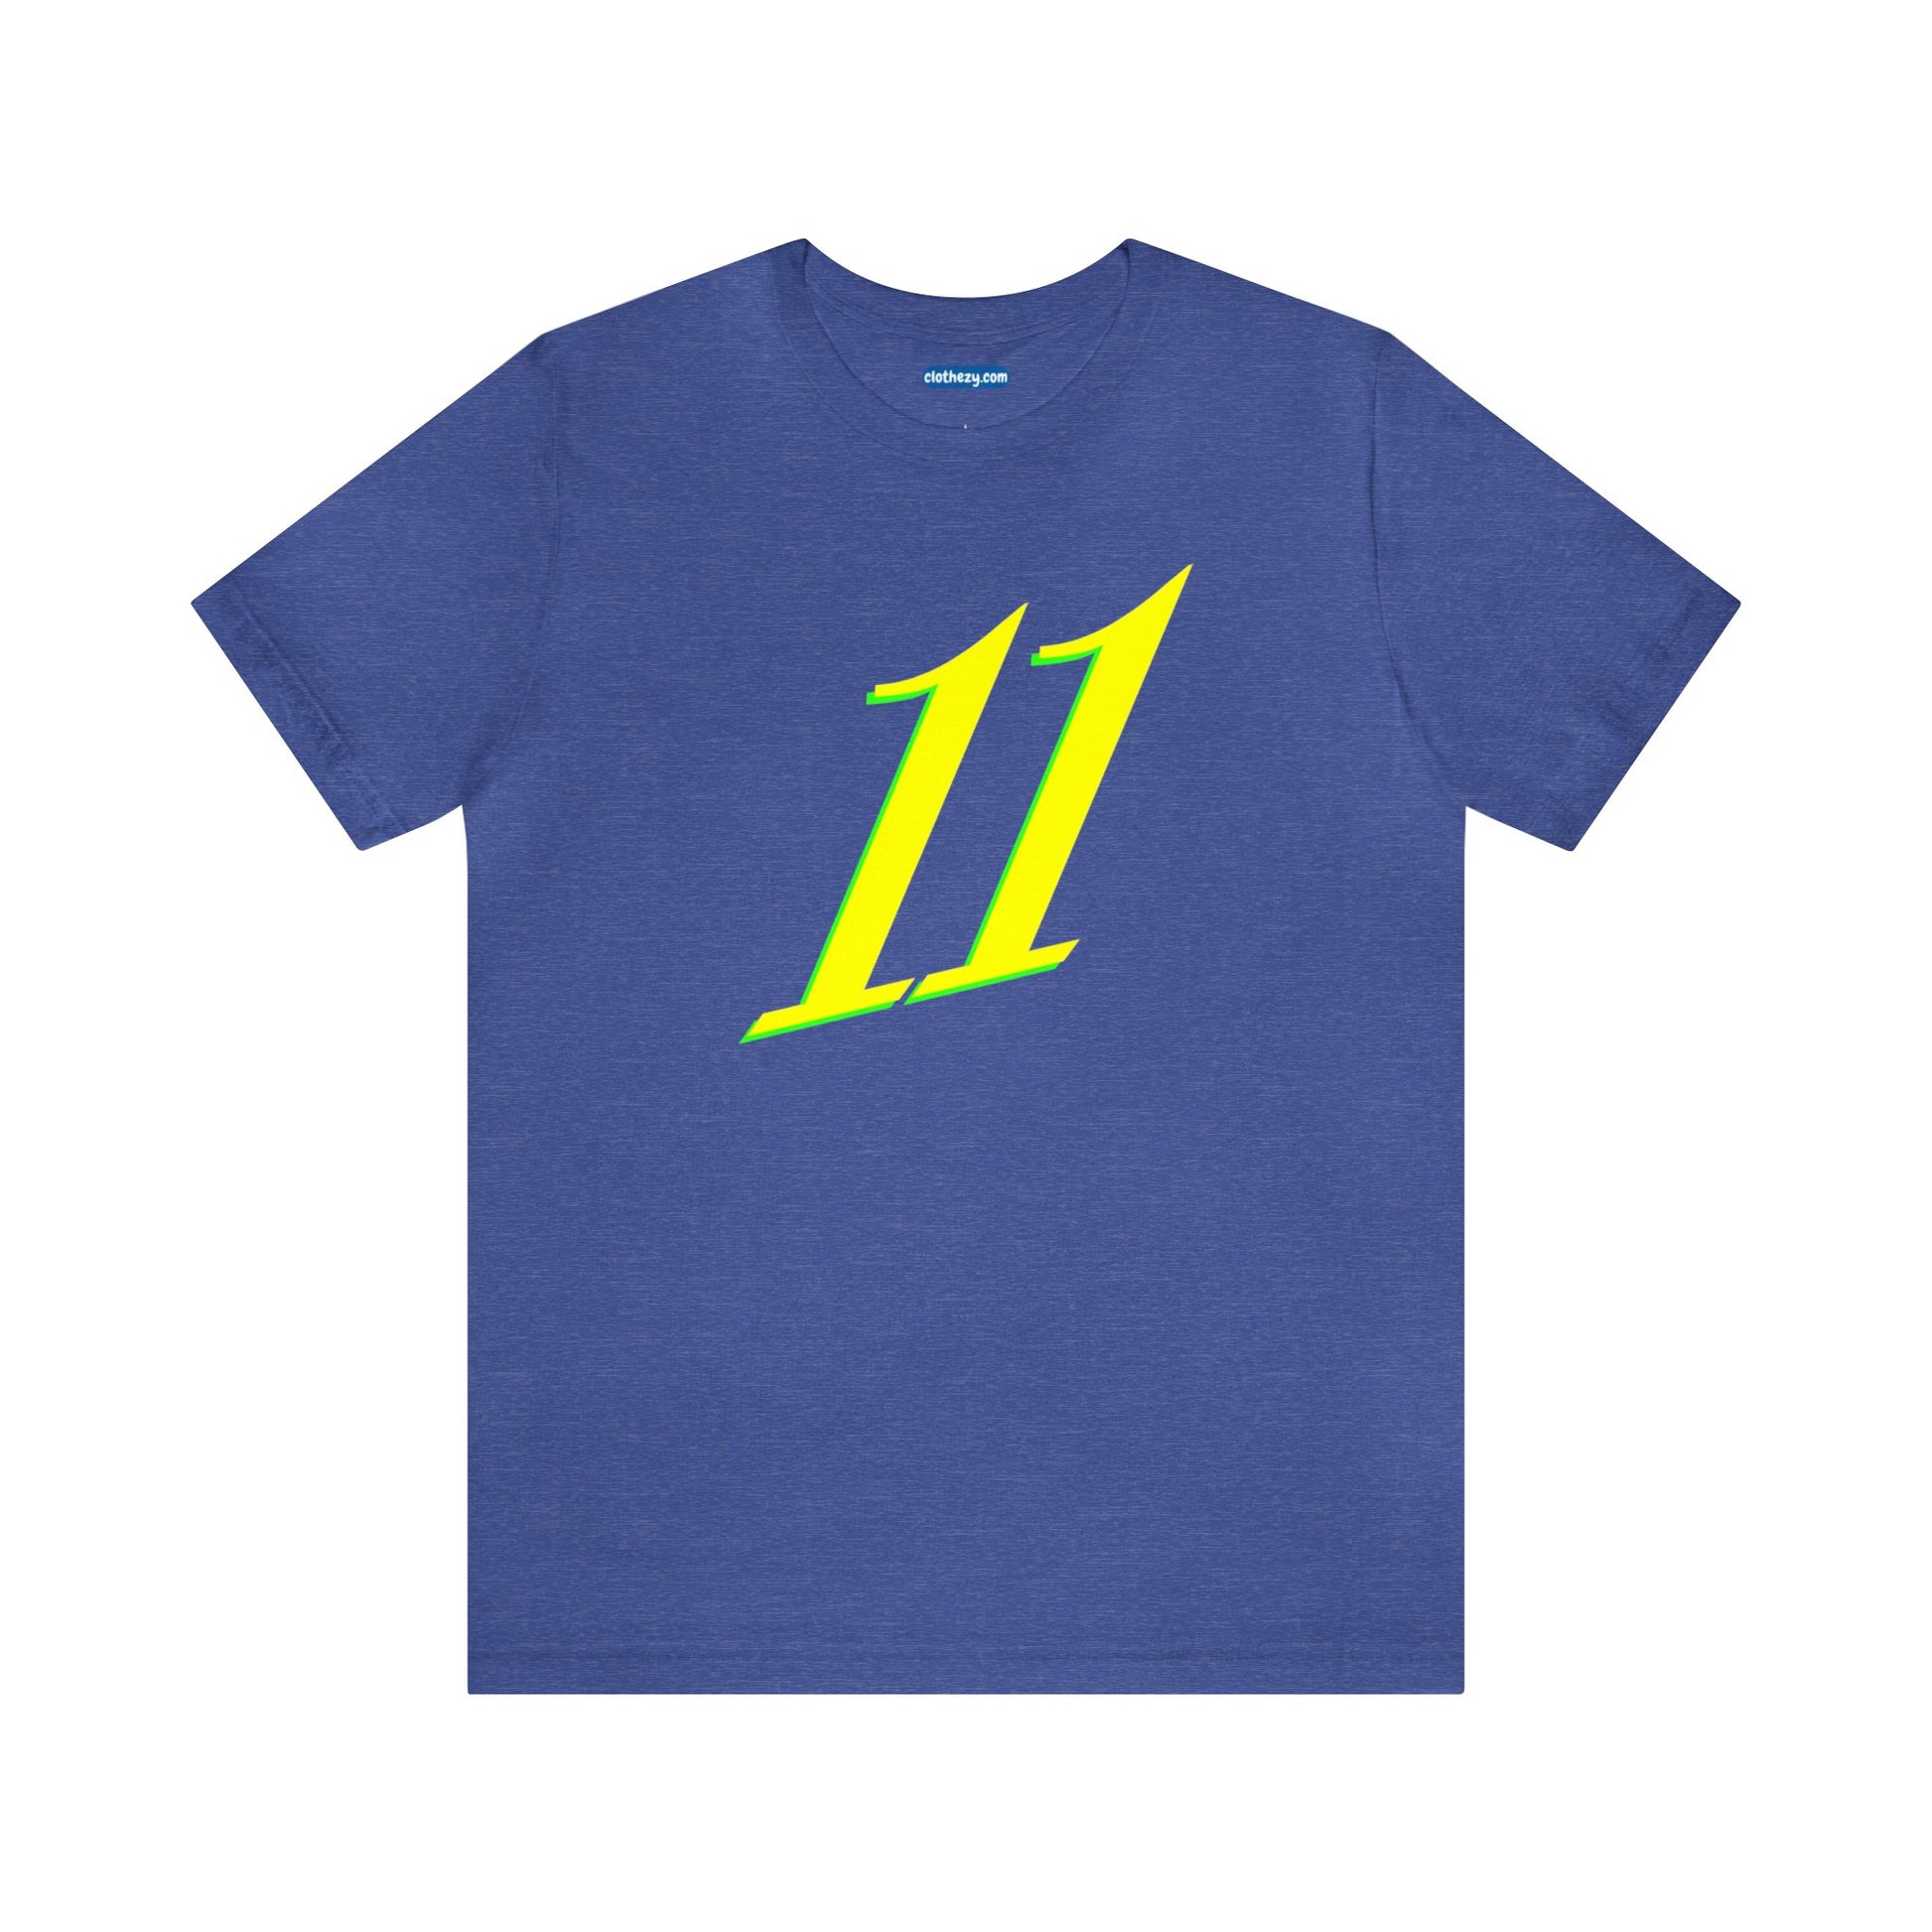 Number 11 Design - Soft Cotton Tee for birthdays and celebrations, Gift for friends and family, Multiple Options by clothezy.com in Royal Blue Heather Size Small - Buy Now